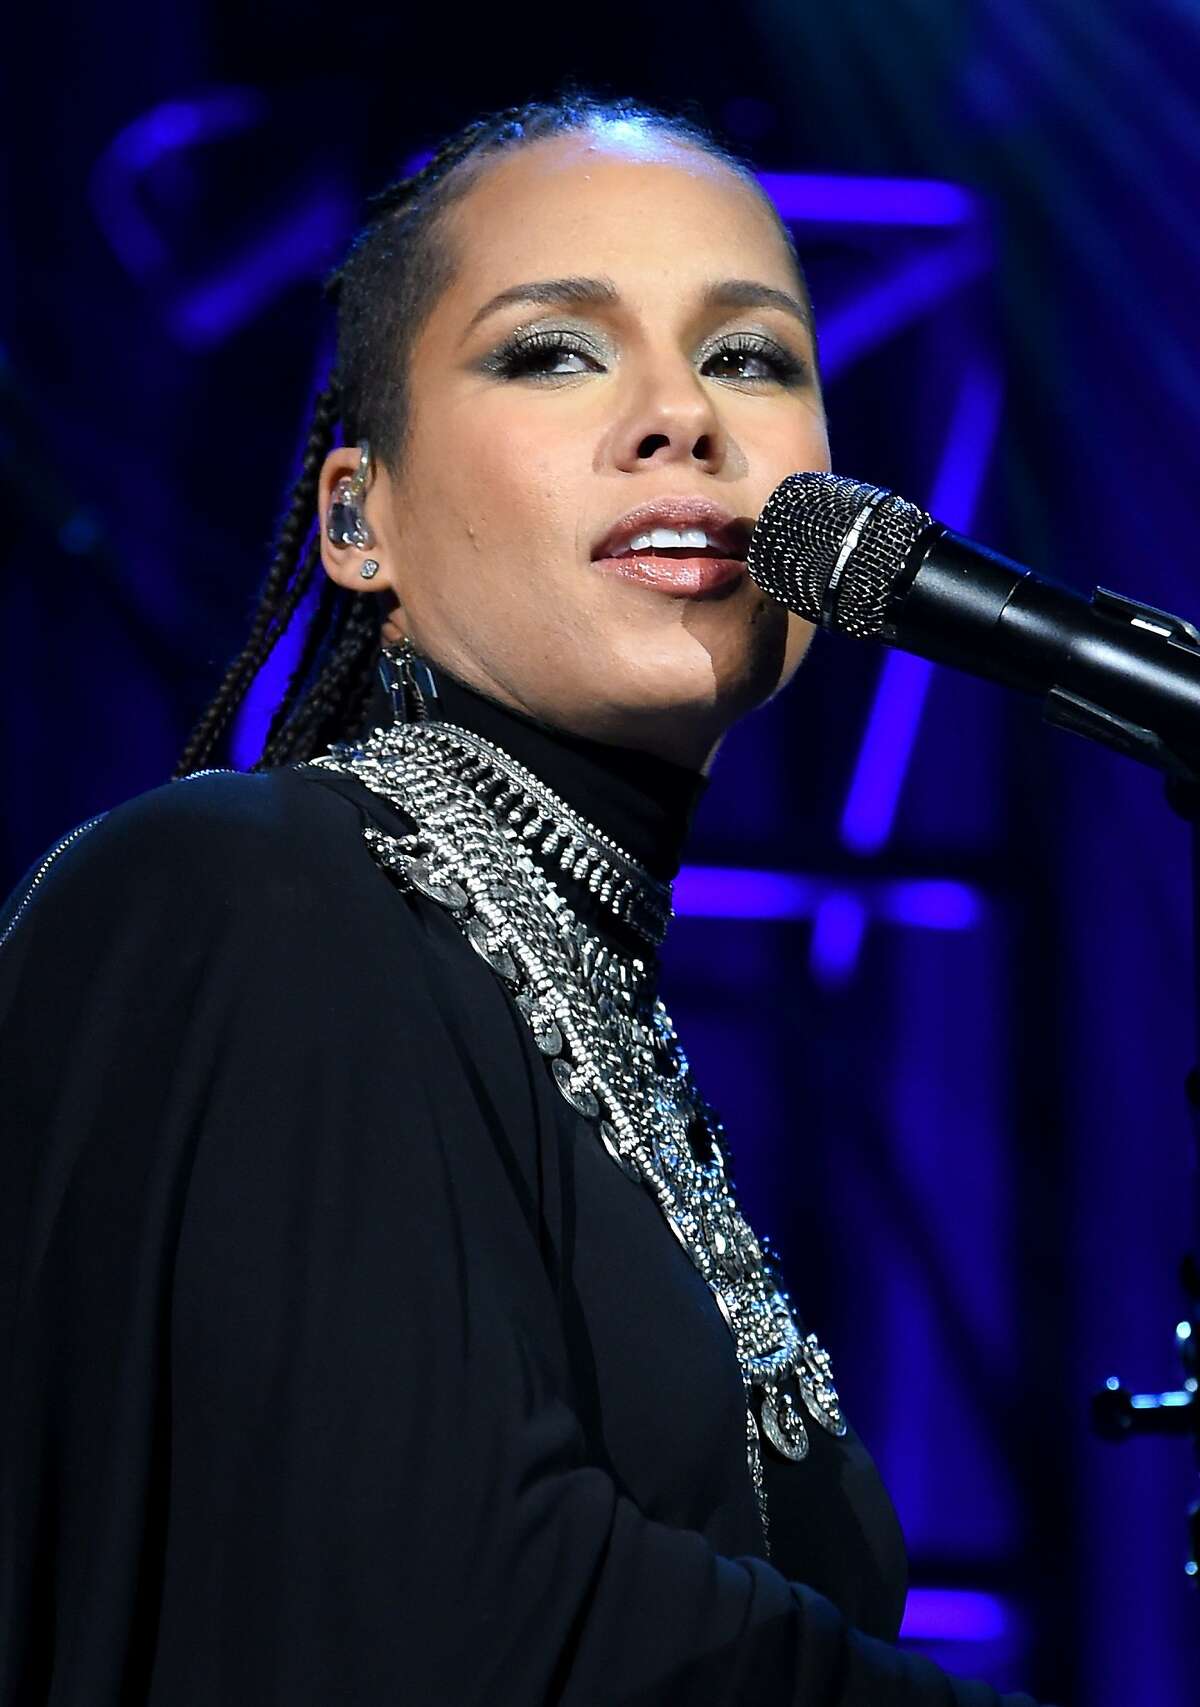 Alicia Keys performs onstage at Angel Ball 2014 hosted by Gabrielle's Angel Foundation at Cipriani Wall Street on October 20, 2014 in New York City. (Photo by Jamie McCarthy/Getty Images for Gabrielle's Angel Foundation)